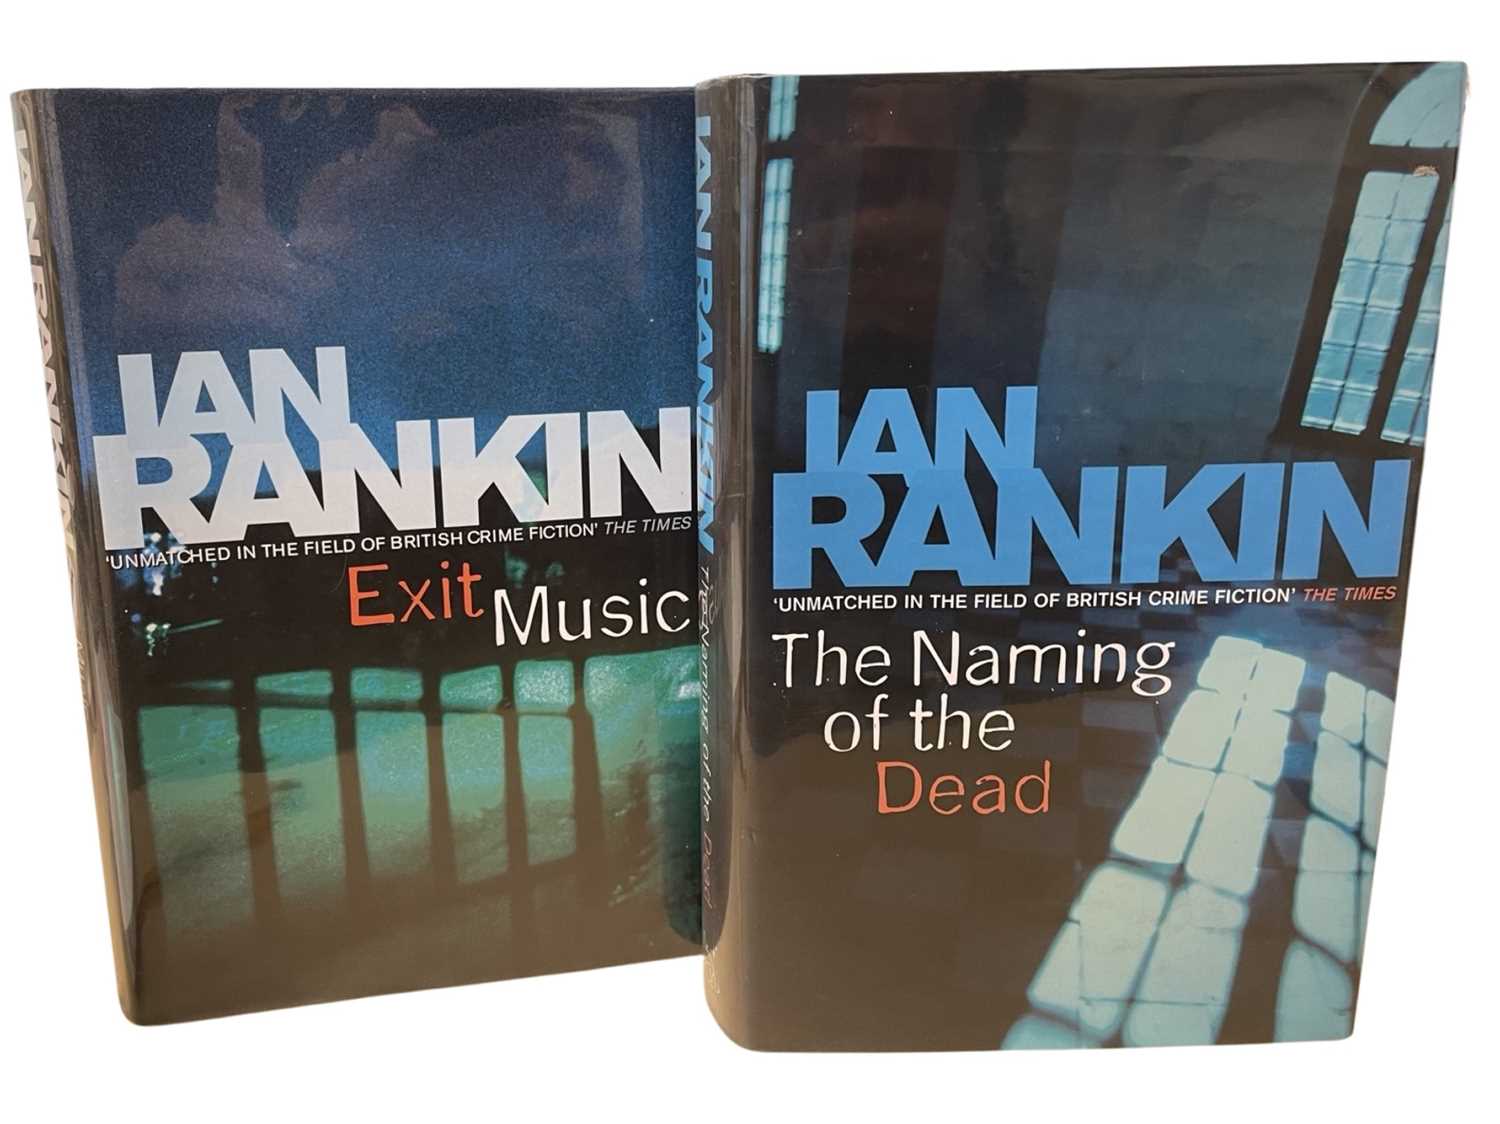 IAN RANKIN: 2 inscribed first edition titles: THE NAMING OF THE DEAD, London, Orion, 2006; EXIT